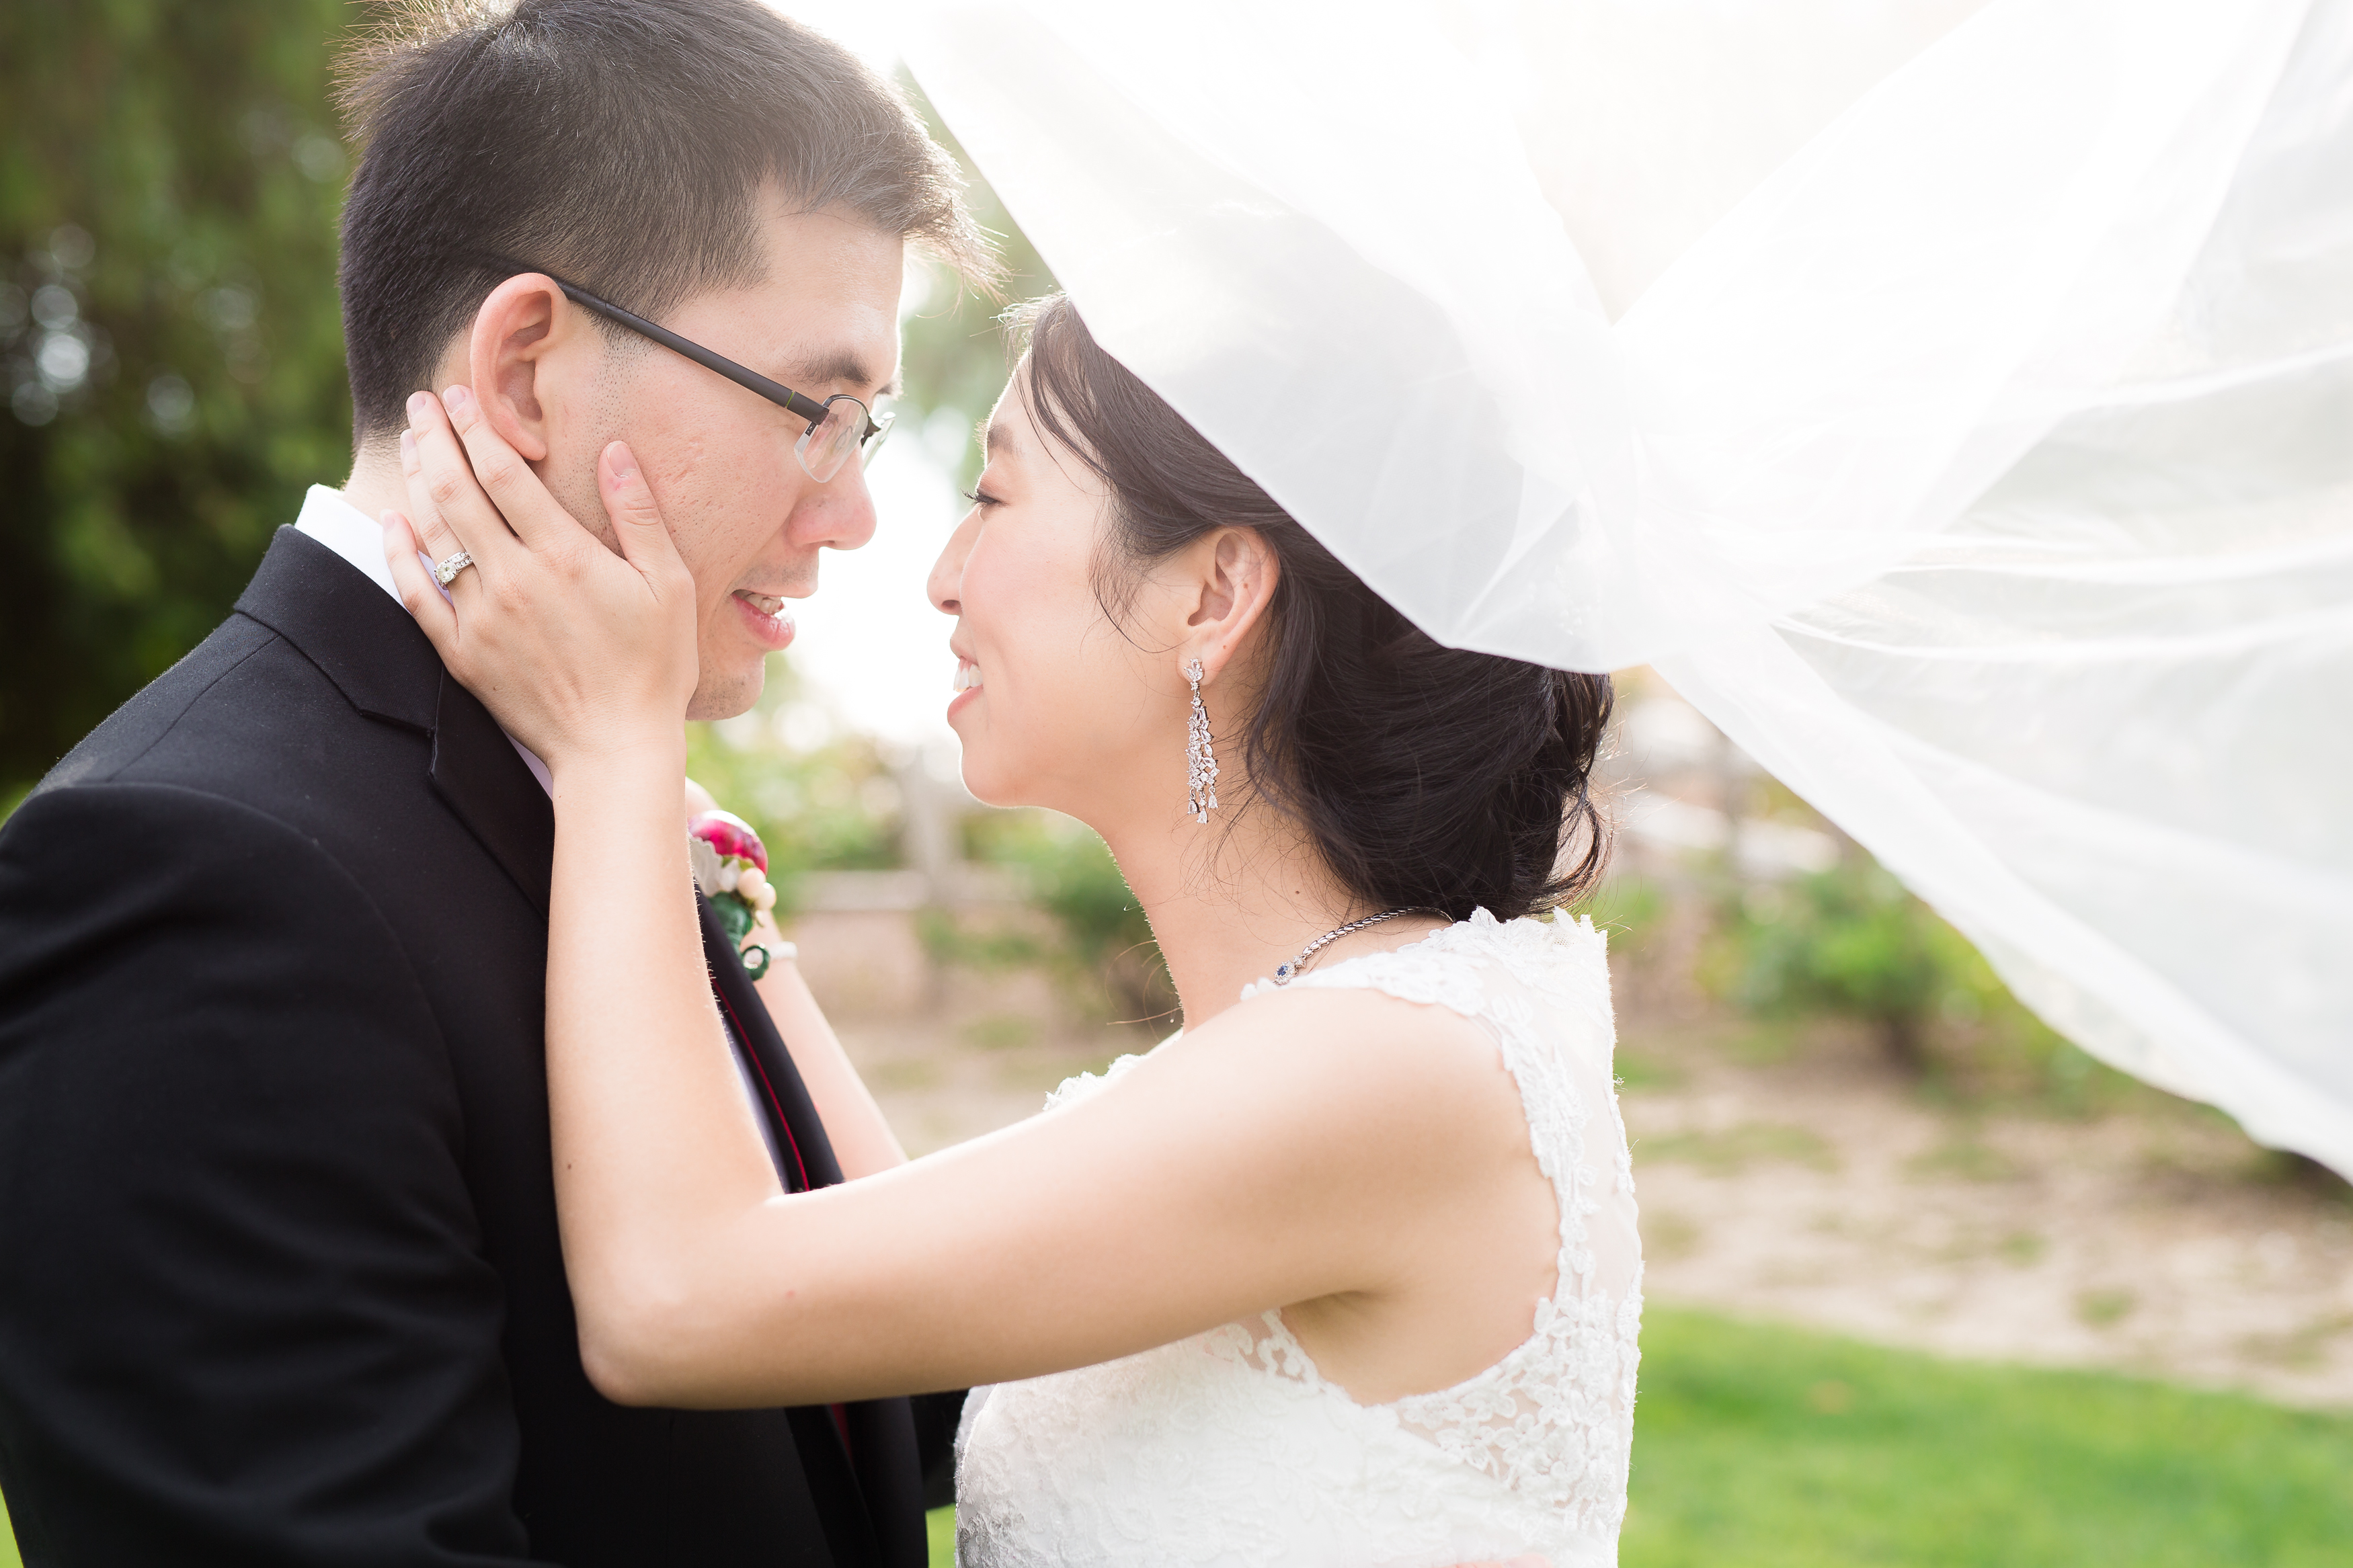 Bride cupping groom's face smiling with veil blowing in wind